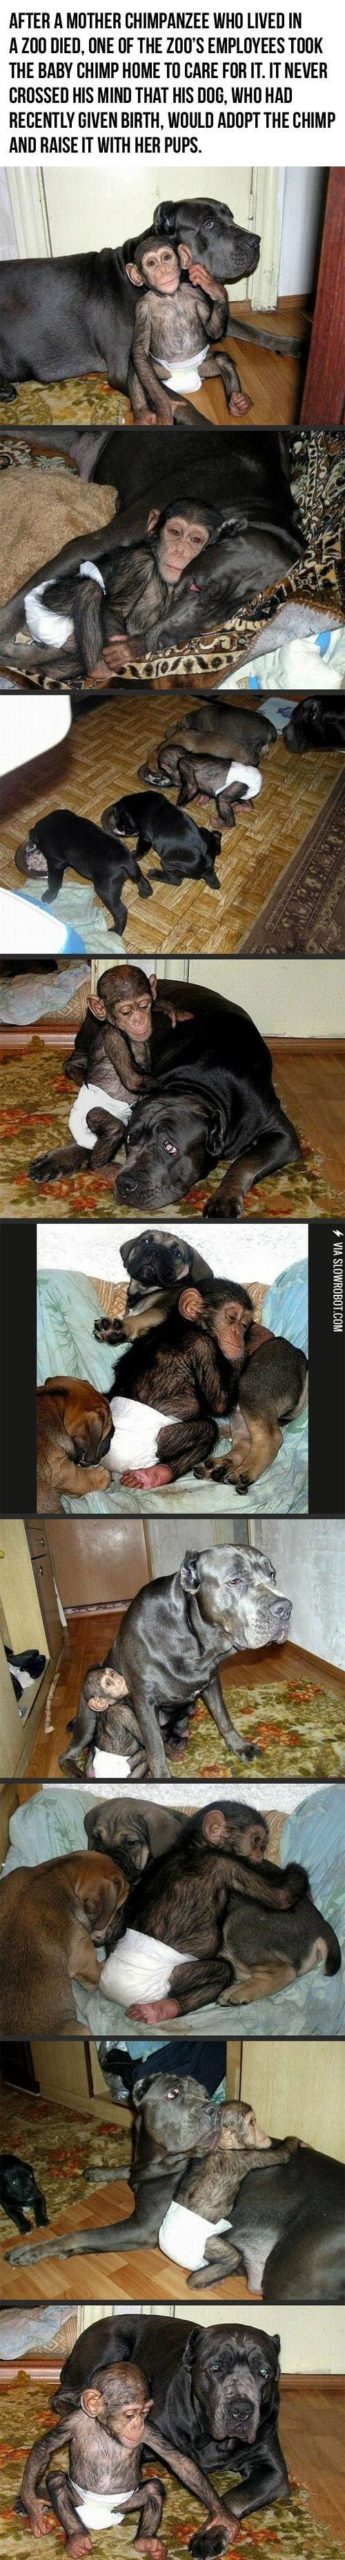 A+baby+chimp+adopted+by+a+dog.